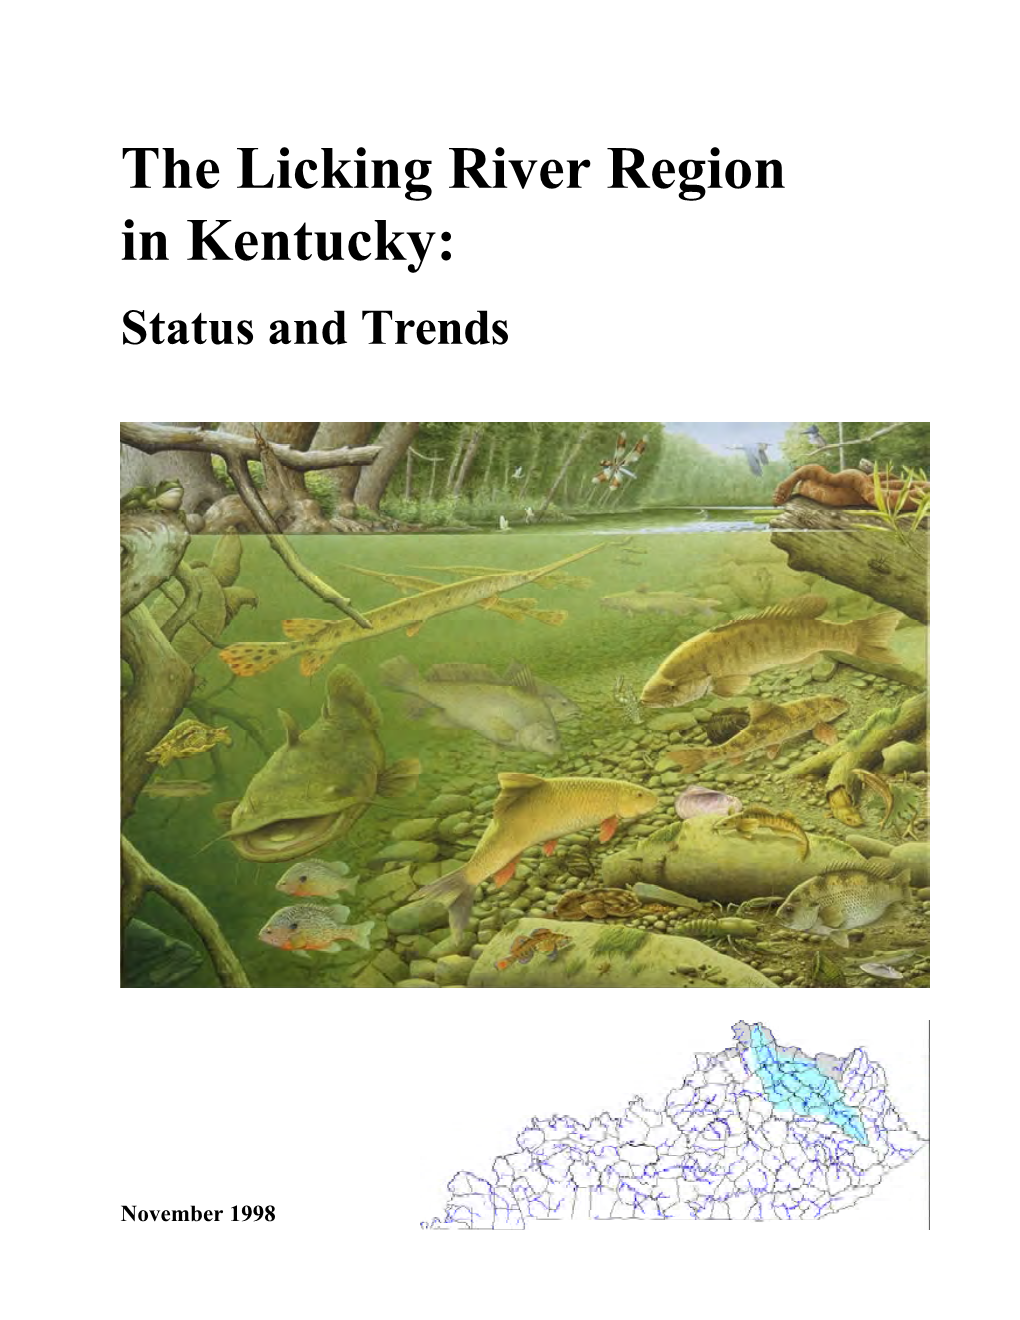 Licking River Region in Kentucky: Status and Trends